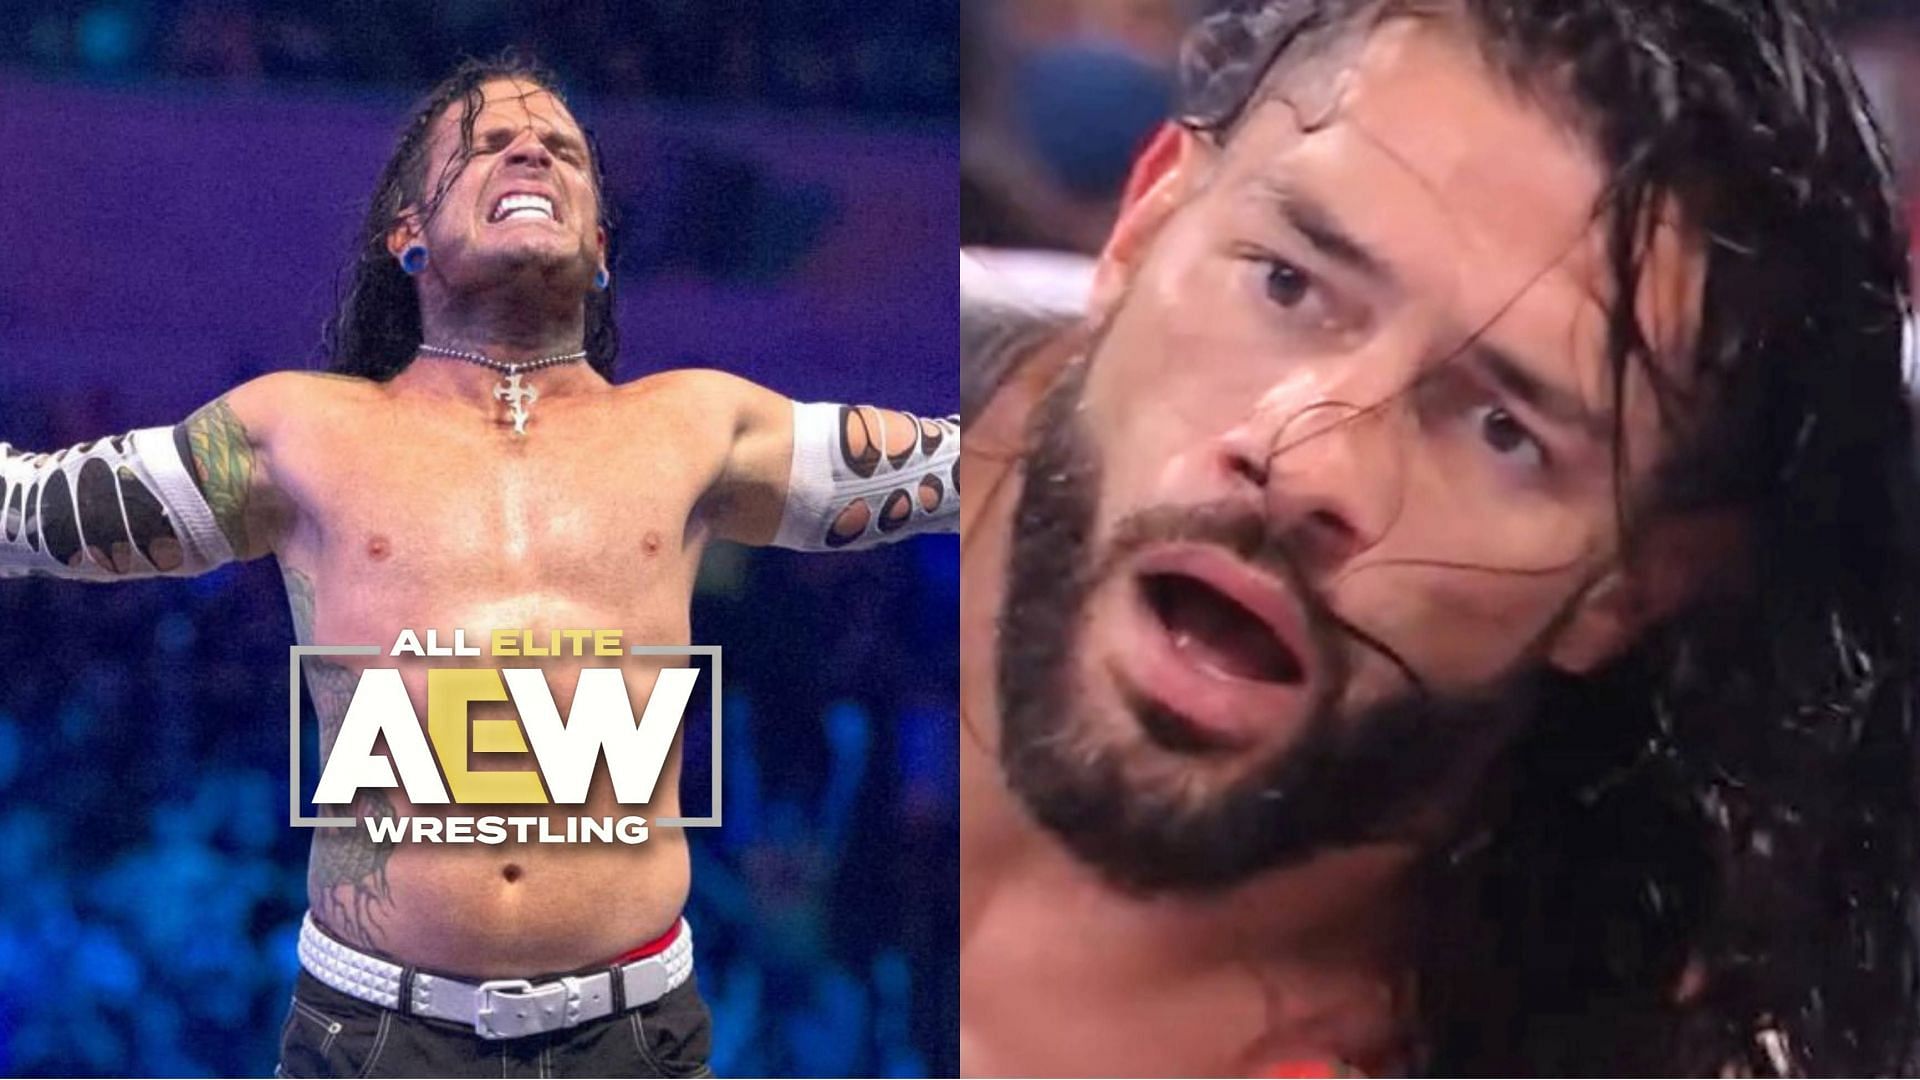 WWE News & Rumor Roundup: Reason why major star missed Survivor Series,  Concern over Roman Reigns' match, Jeff Hardy on a reunion with AEW wrestler  (November 22, 2021)